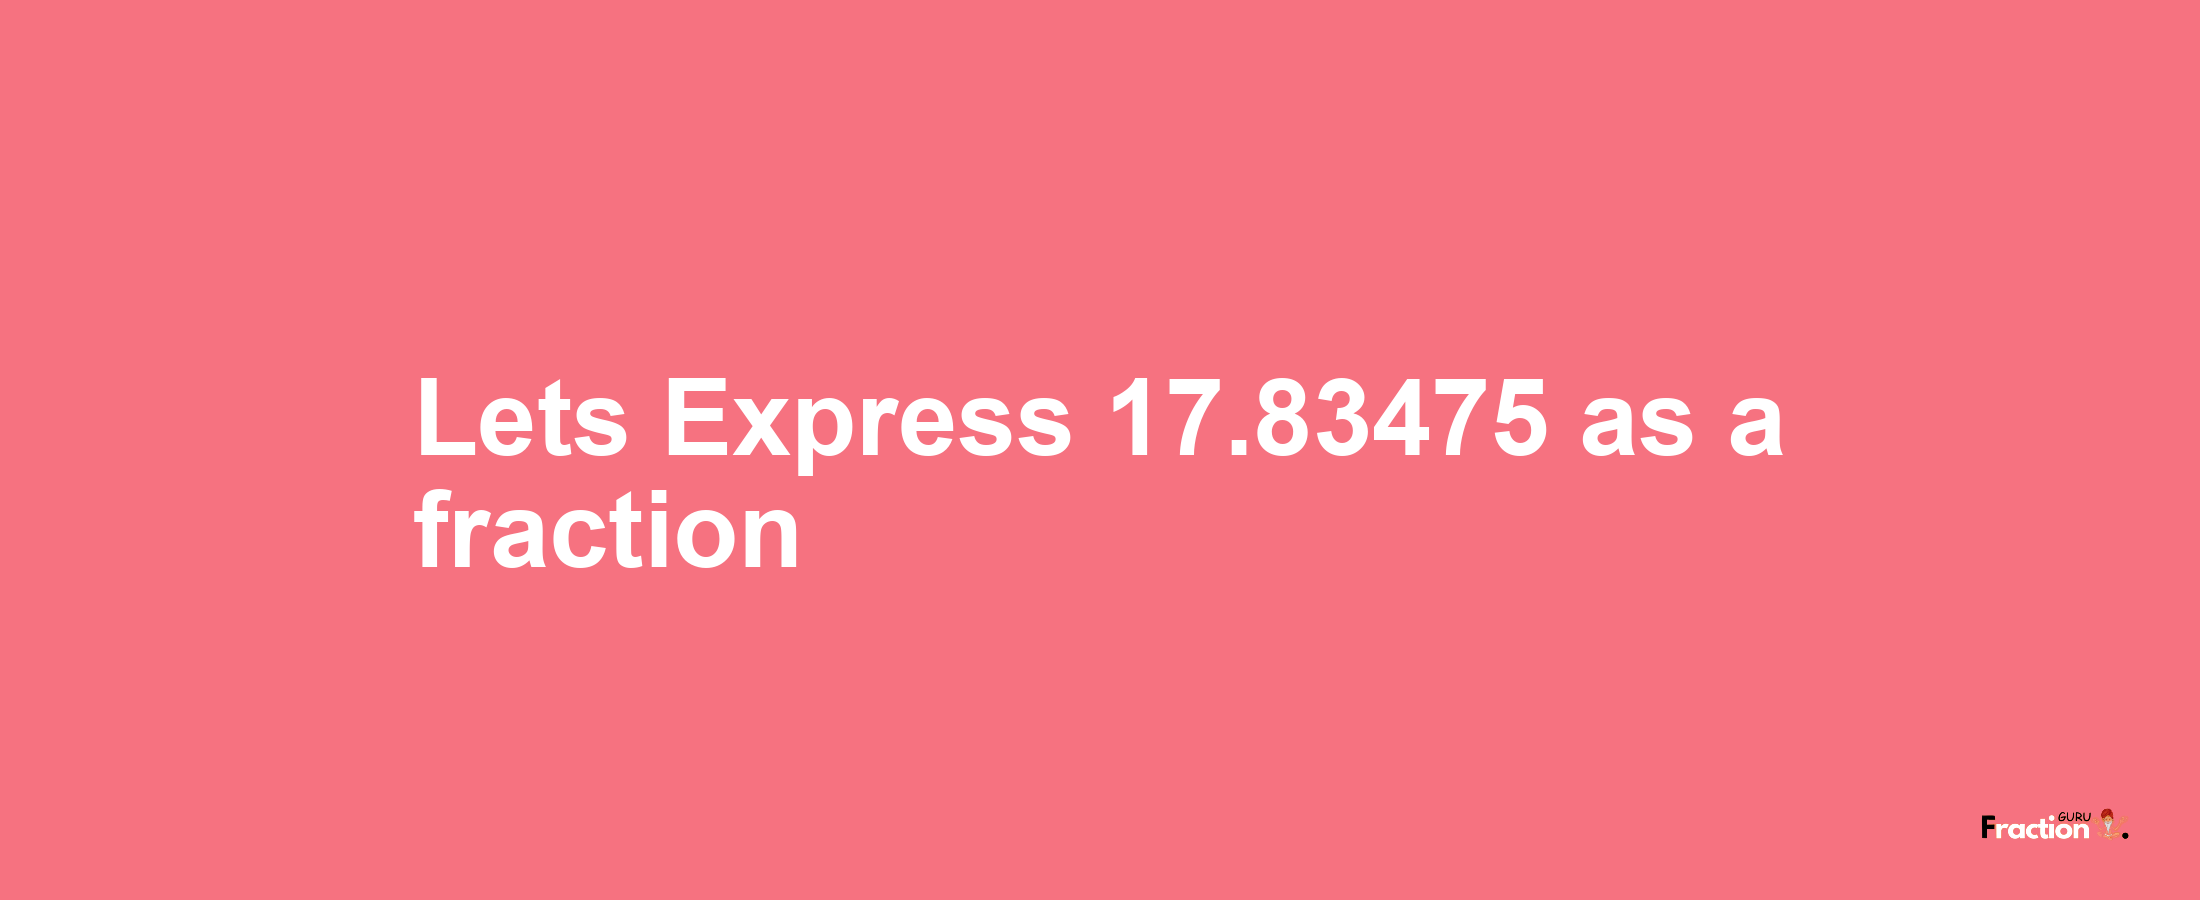 Lets Express 17.83475 as afraction